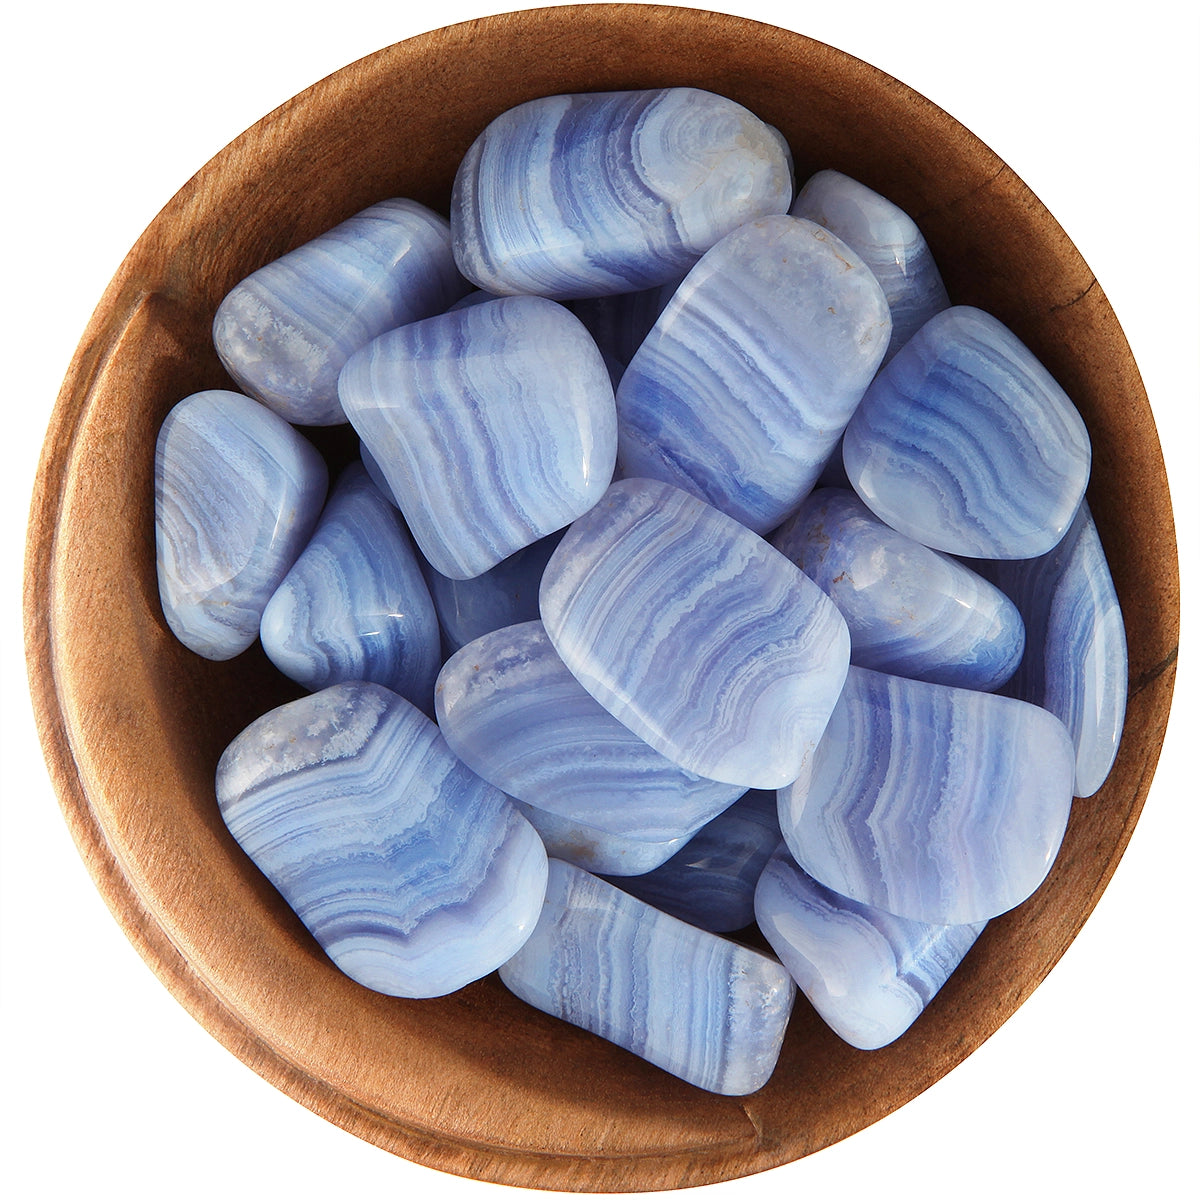 Blue lace agate is a type of chalcedony that is known for its delicate blue lace-like patterns and soothing energy, believed to promote calm communication and self-expression.